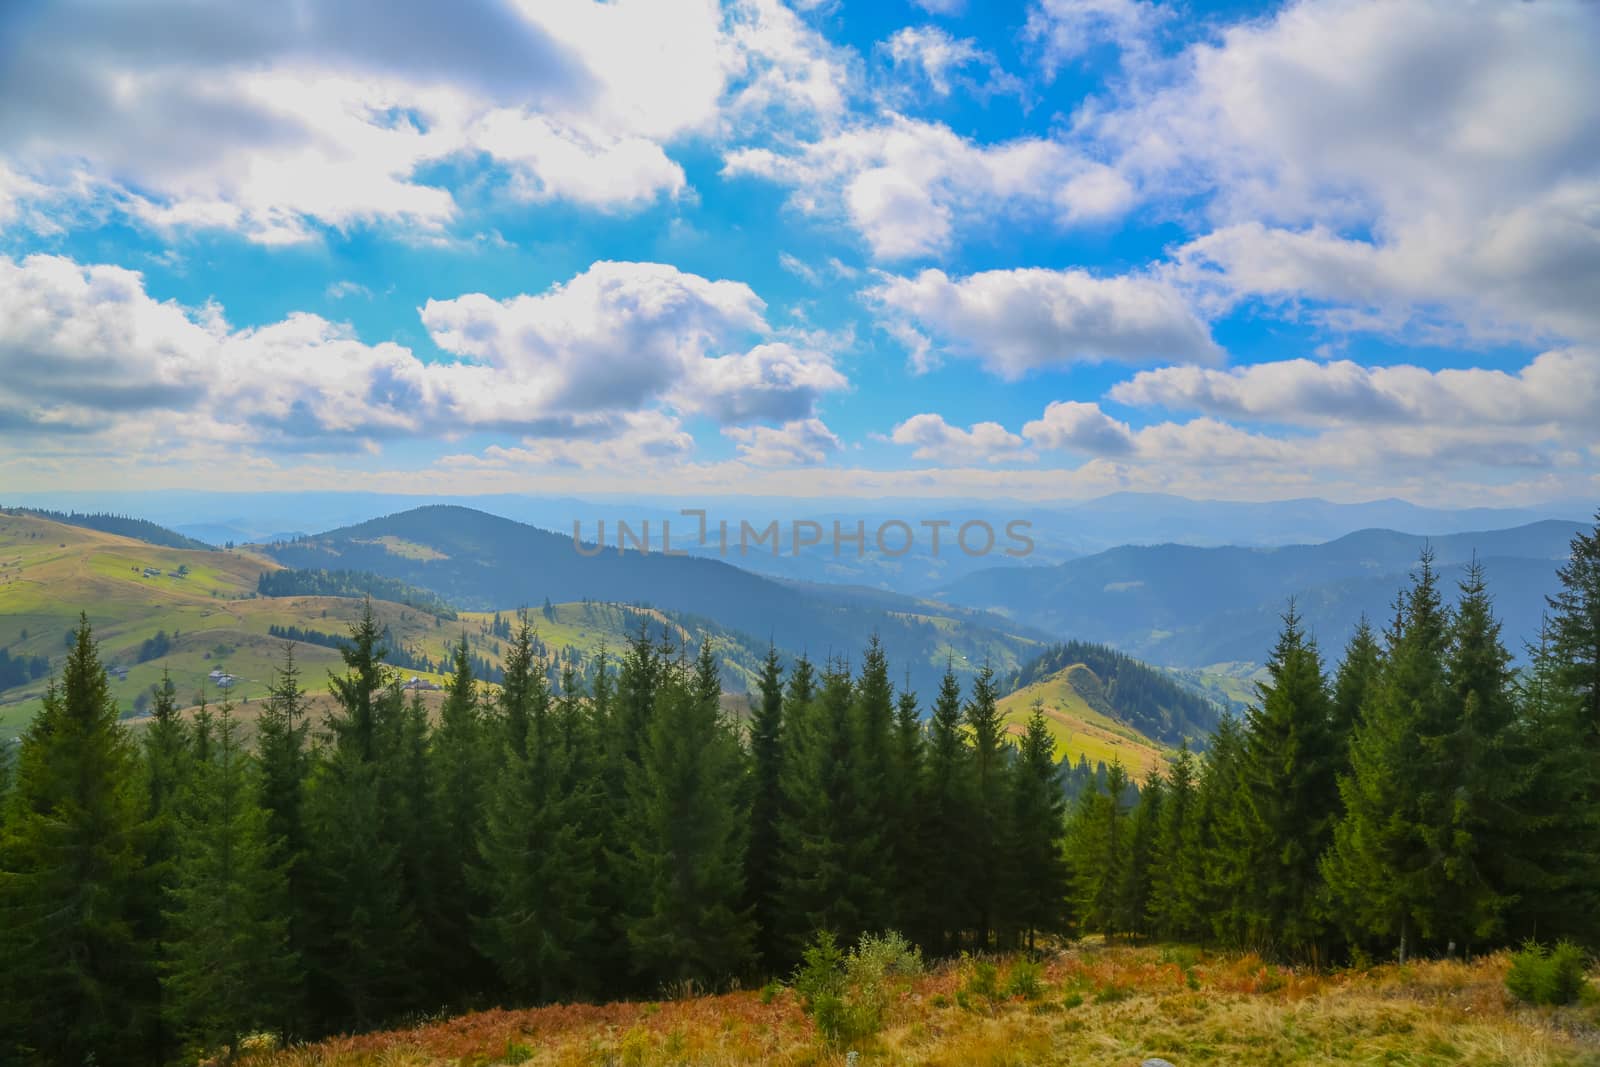 Green fir trees in the hills on a sunny day. Mountains visible to the horizon.